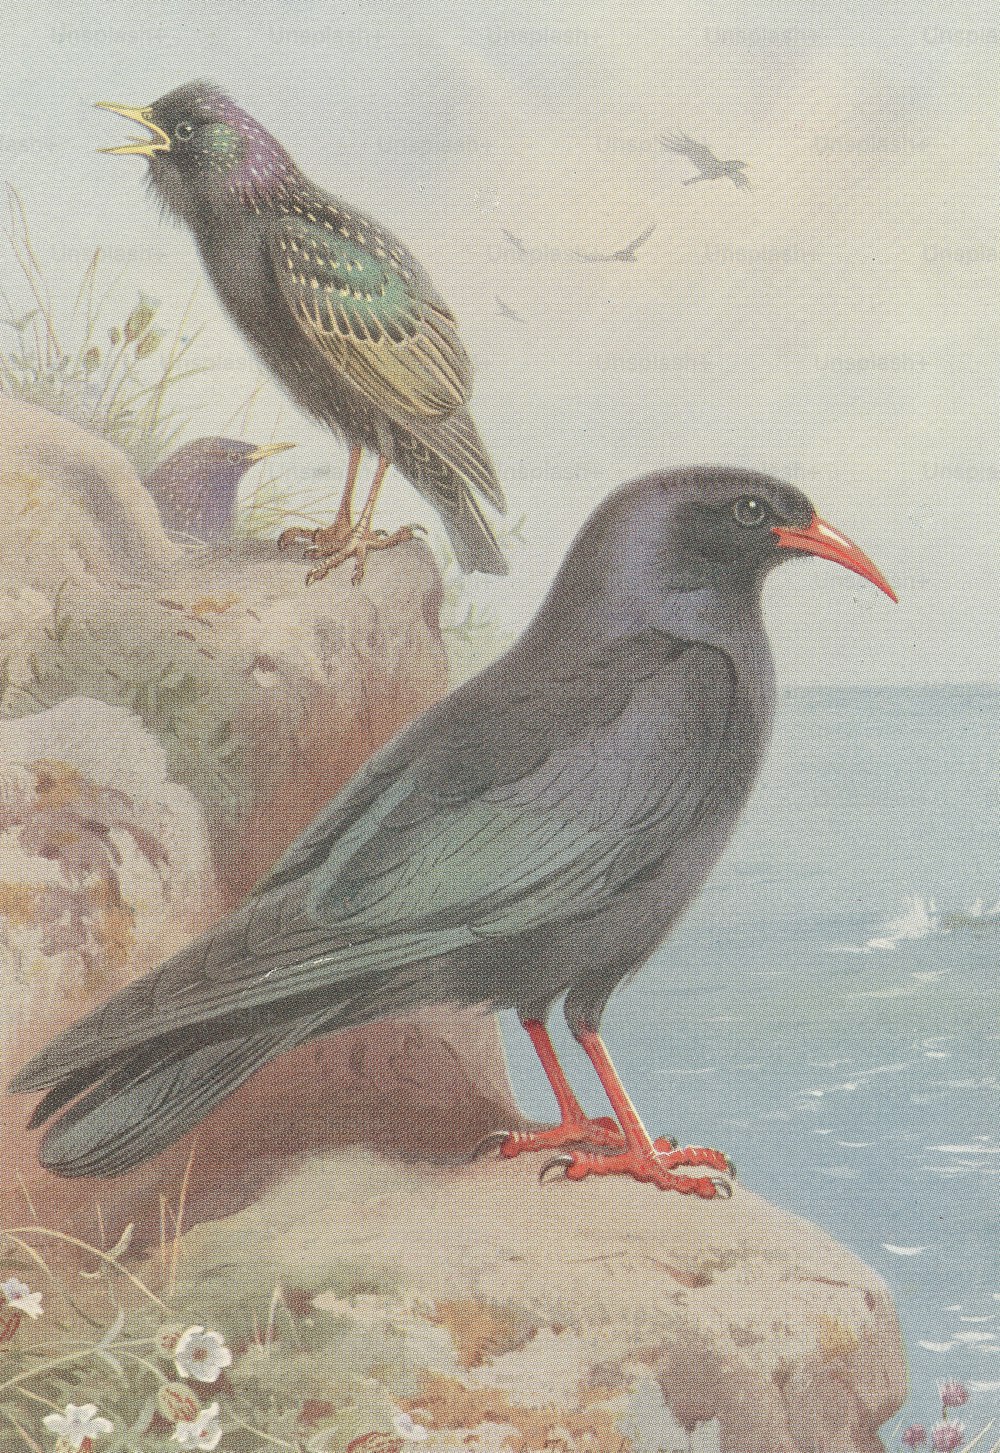 A starling (left) and chough (right) on a rocky coastline, circa 1850. (Photo by Hulton Archive/Getty Images)